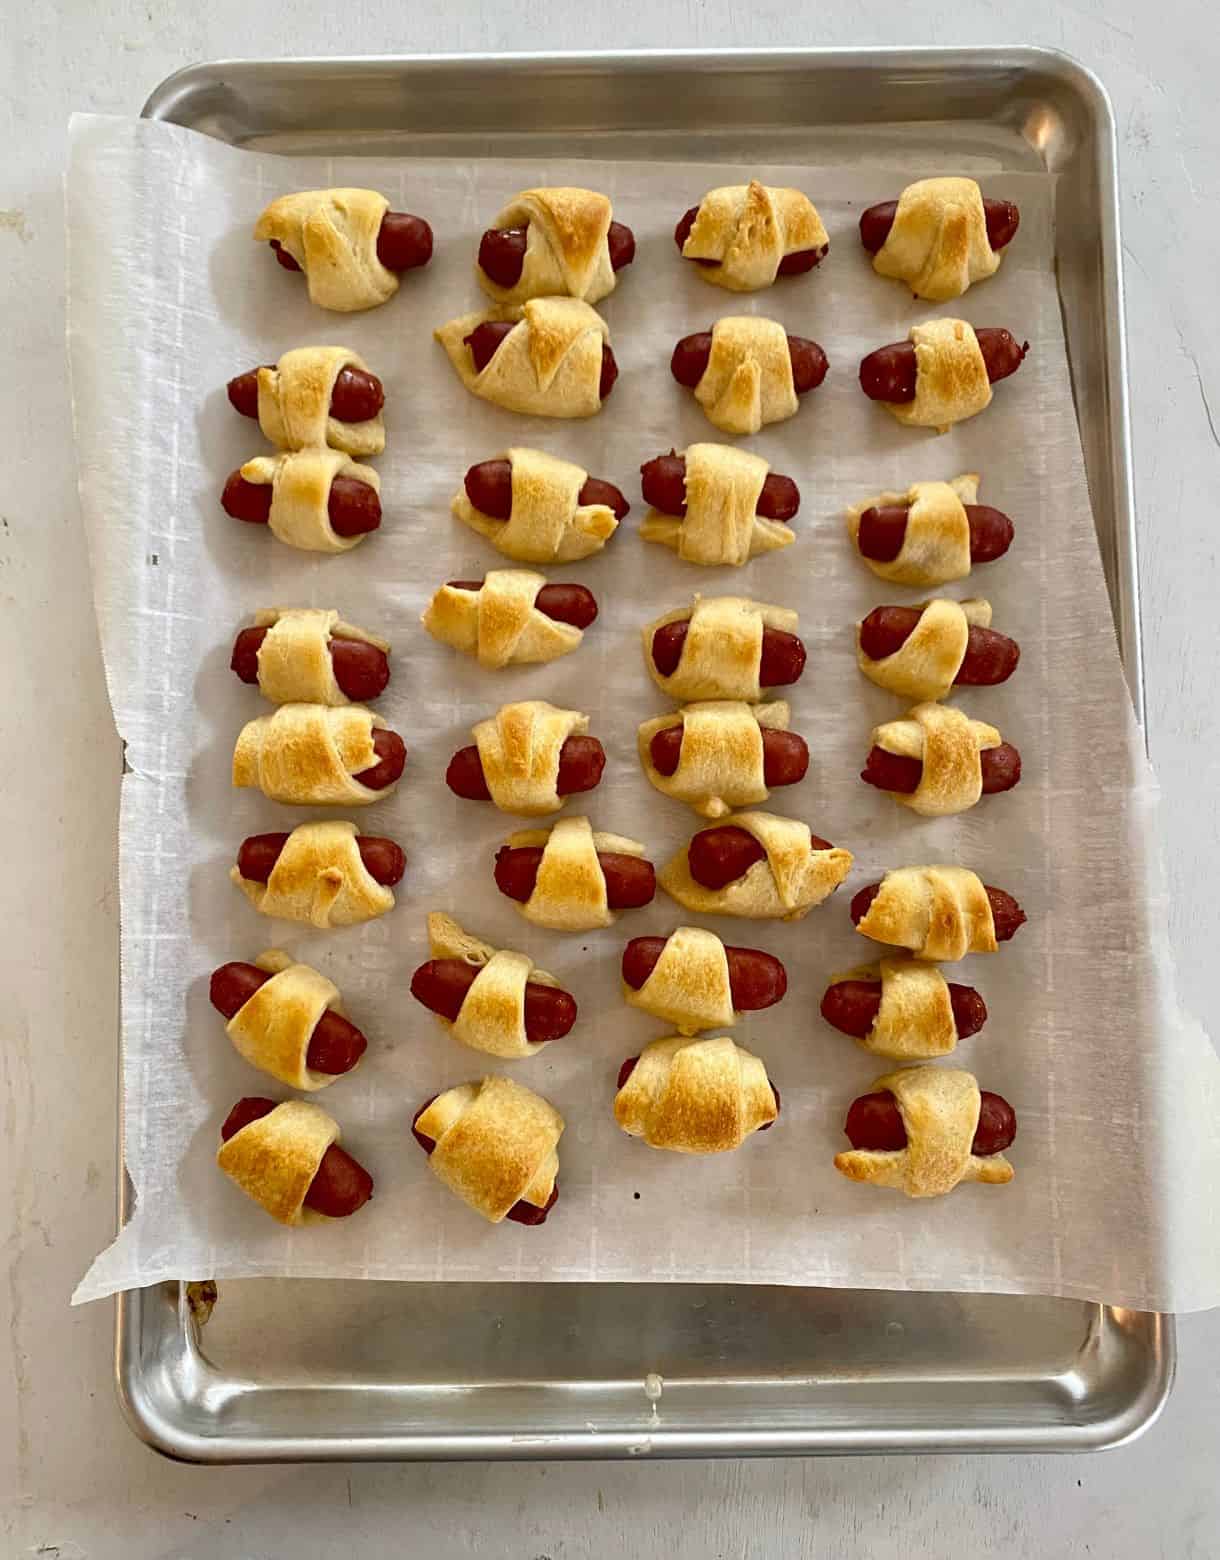 Sheet pan of cooked Pigs in a Blanket.